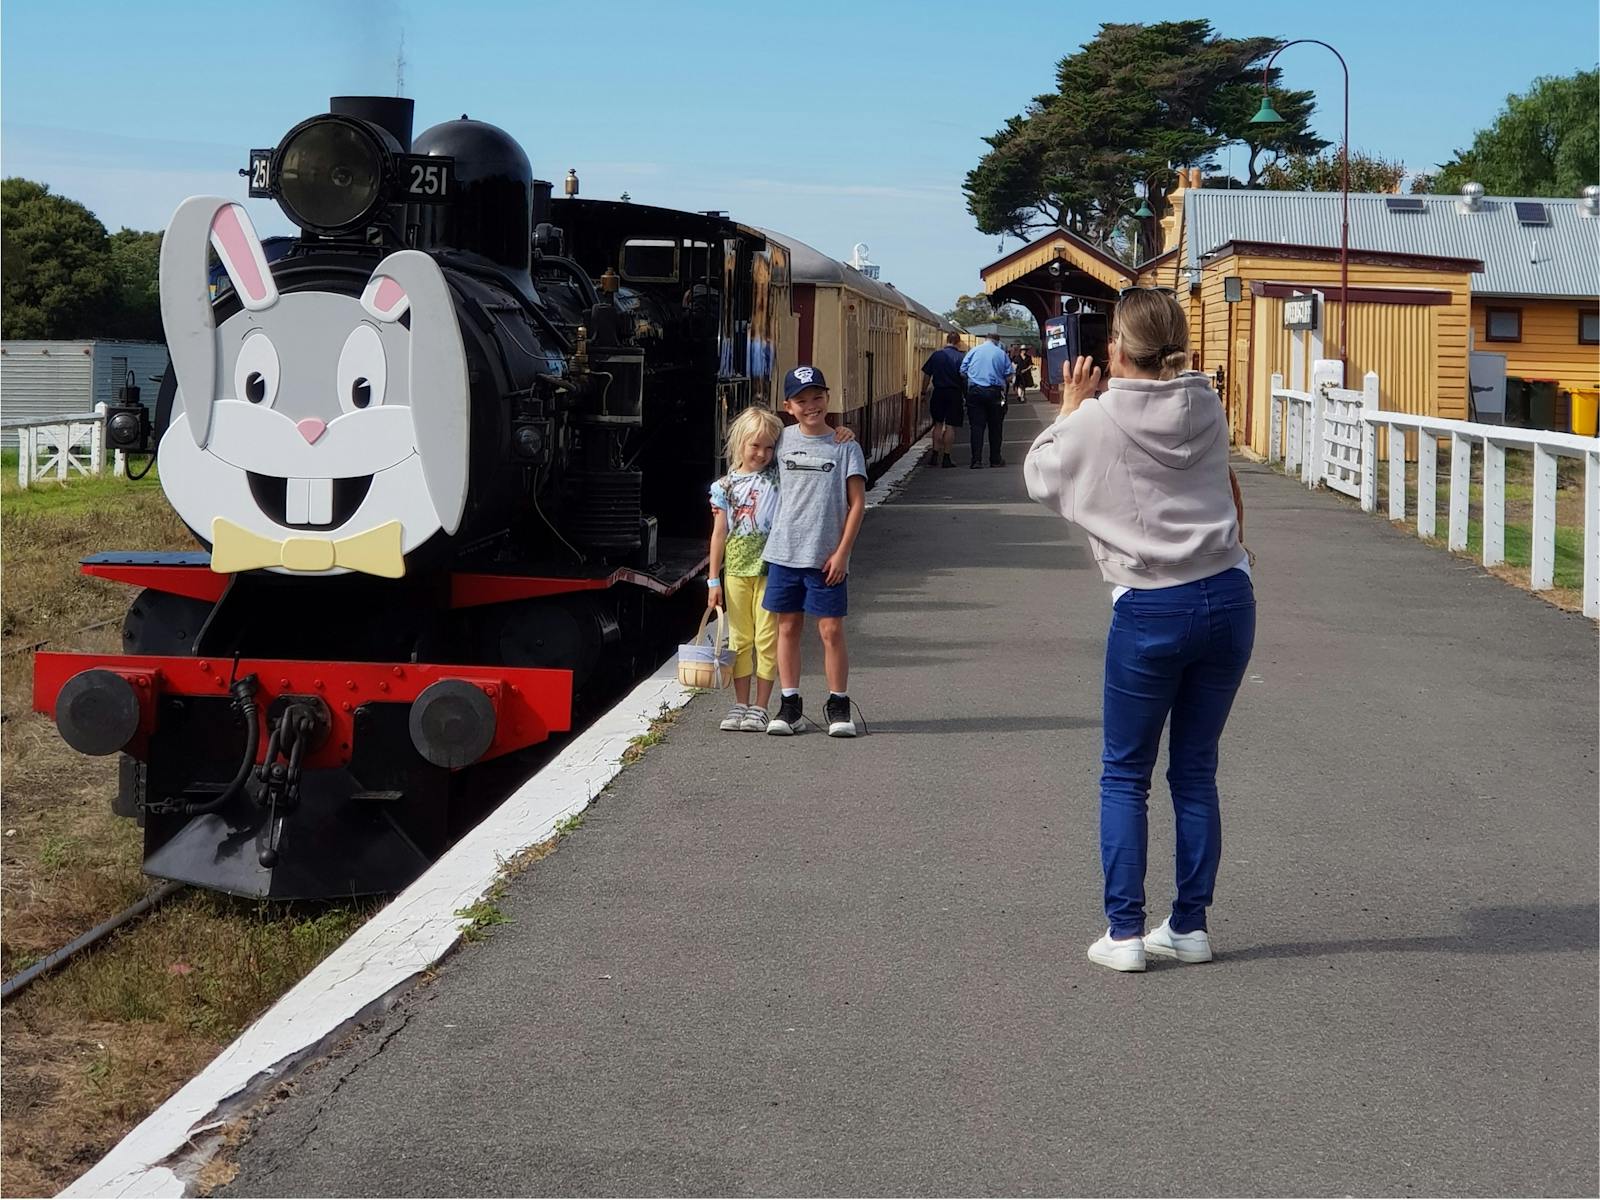 Two children pose infront of the Easter themed train at Bellarine Railway.